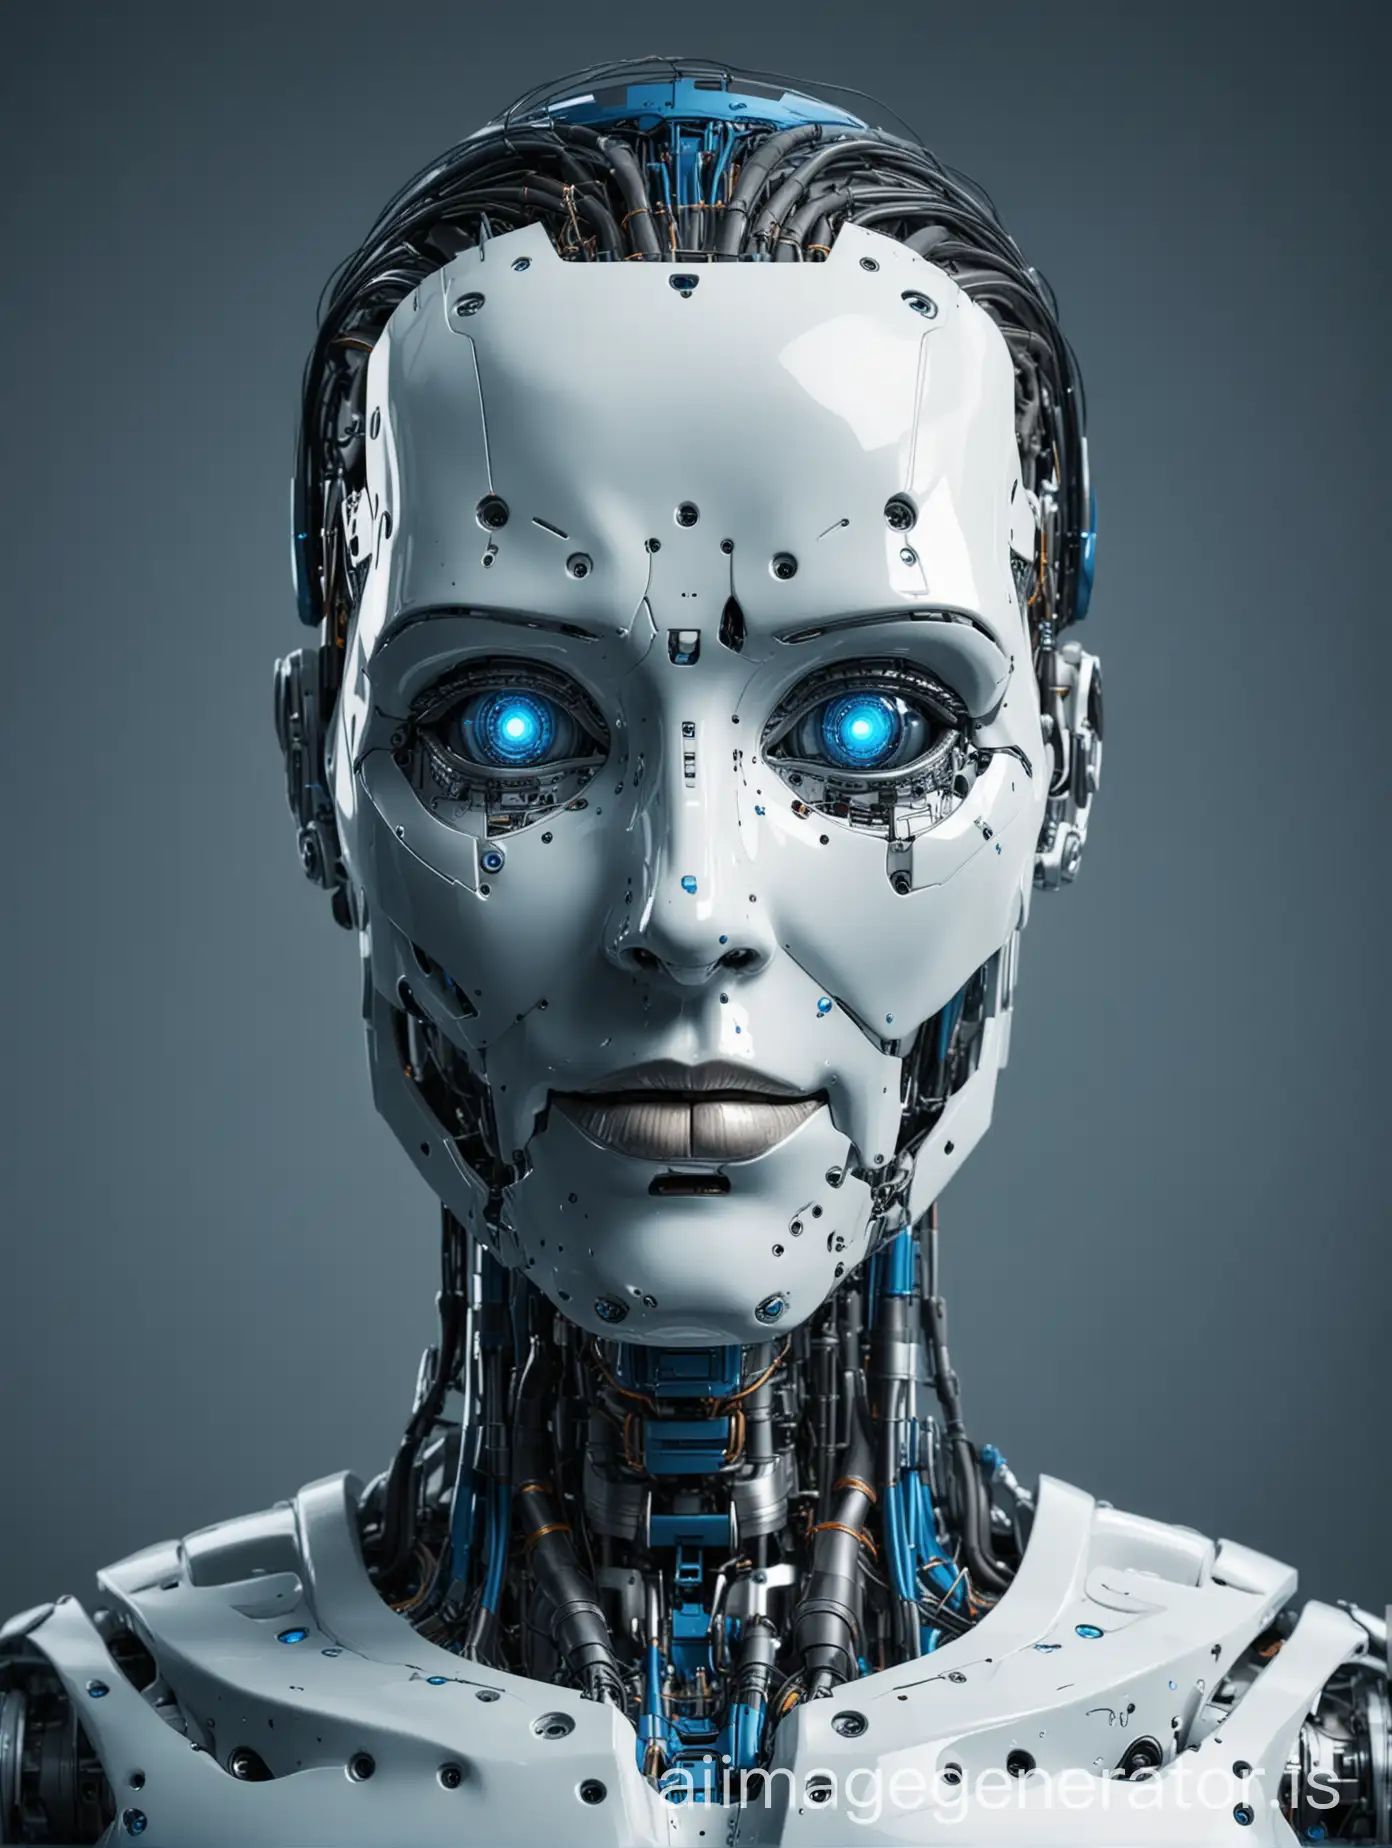 A large, imposing figure of a humanoid AI or robot in the center, with a divided face: one side showing a friendly, helpful expression and the other side showing a more sinister, threatening look. The divided face represents the dual nature of AI: its potential for both benefit and harm realistic blue